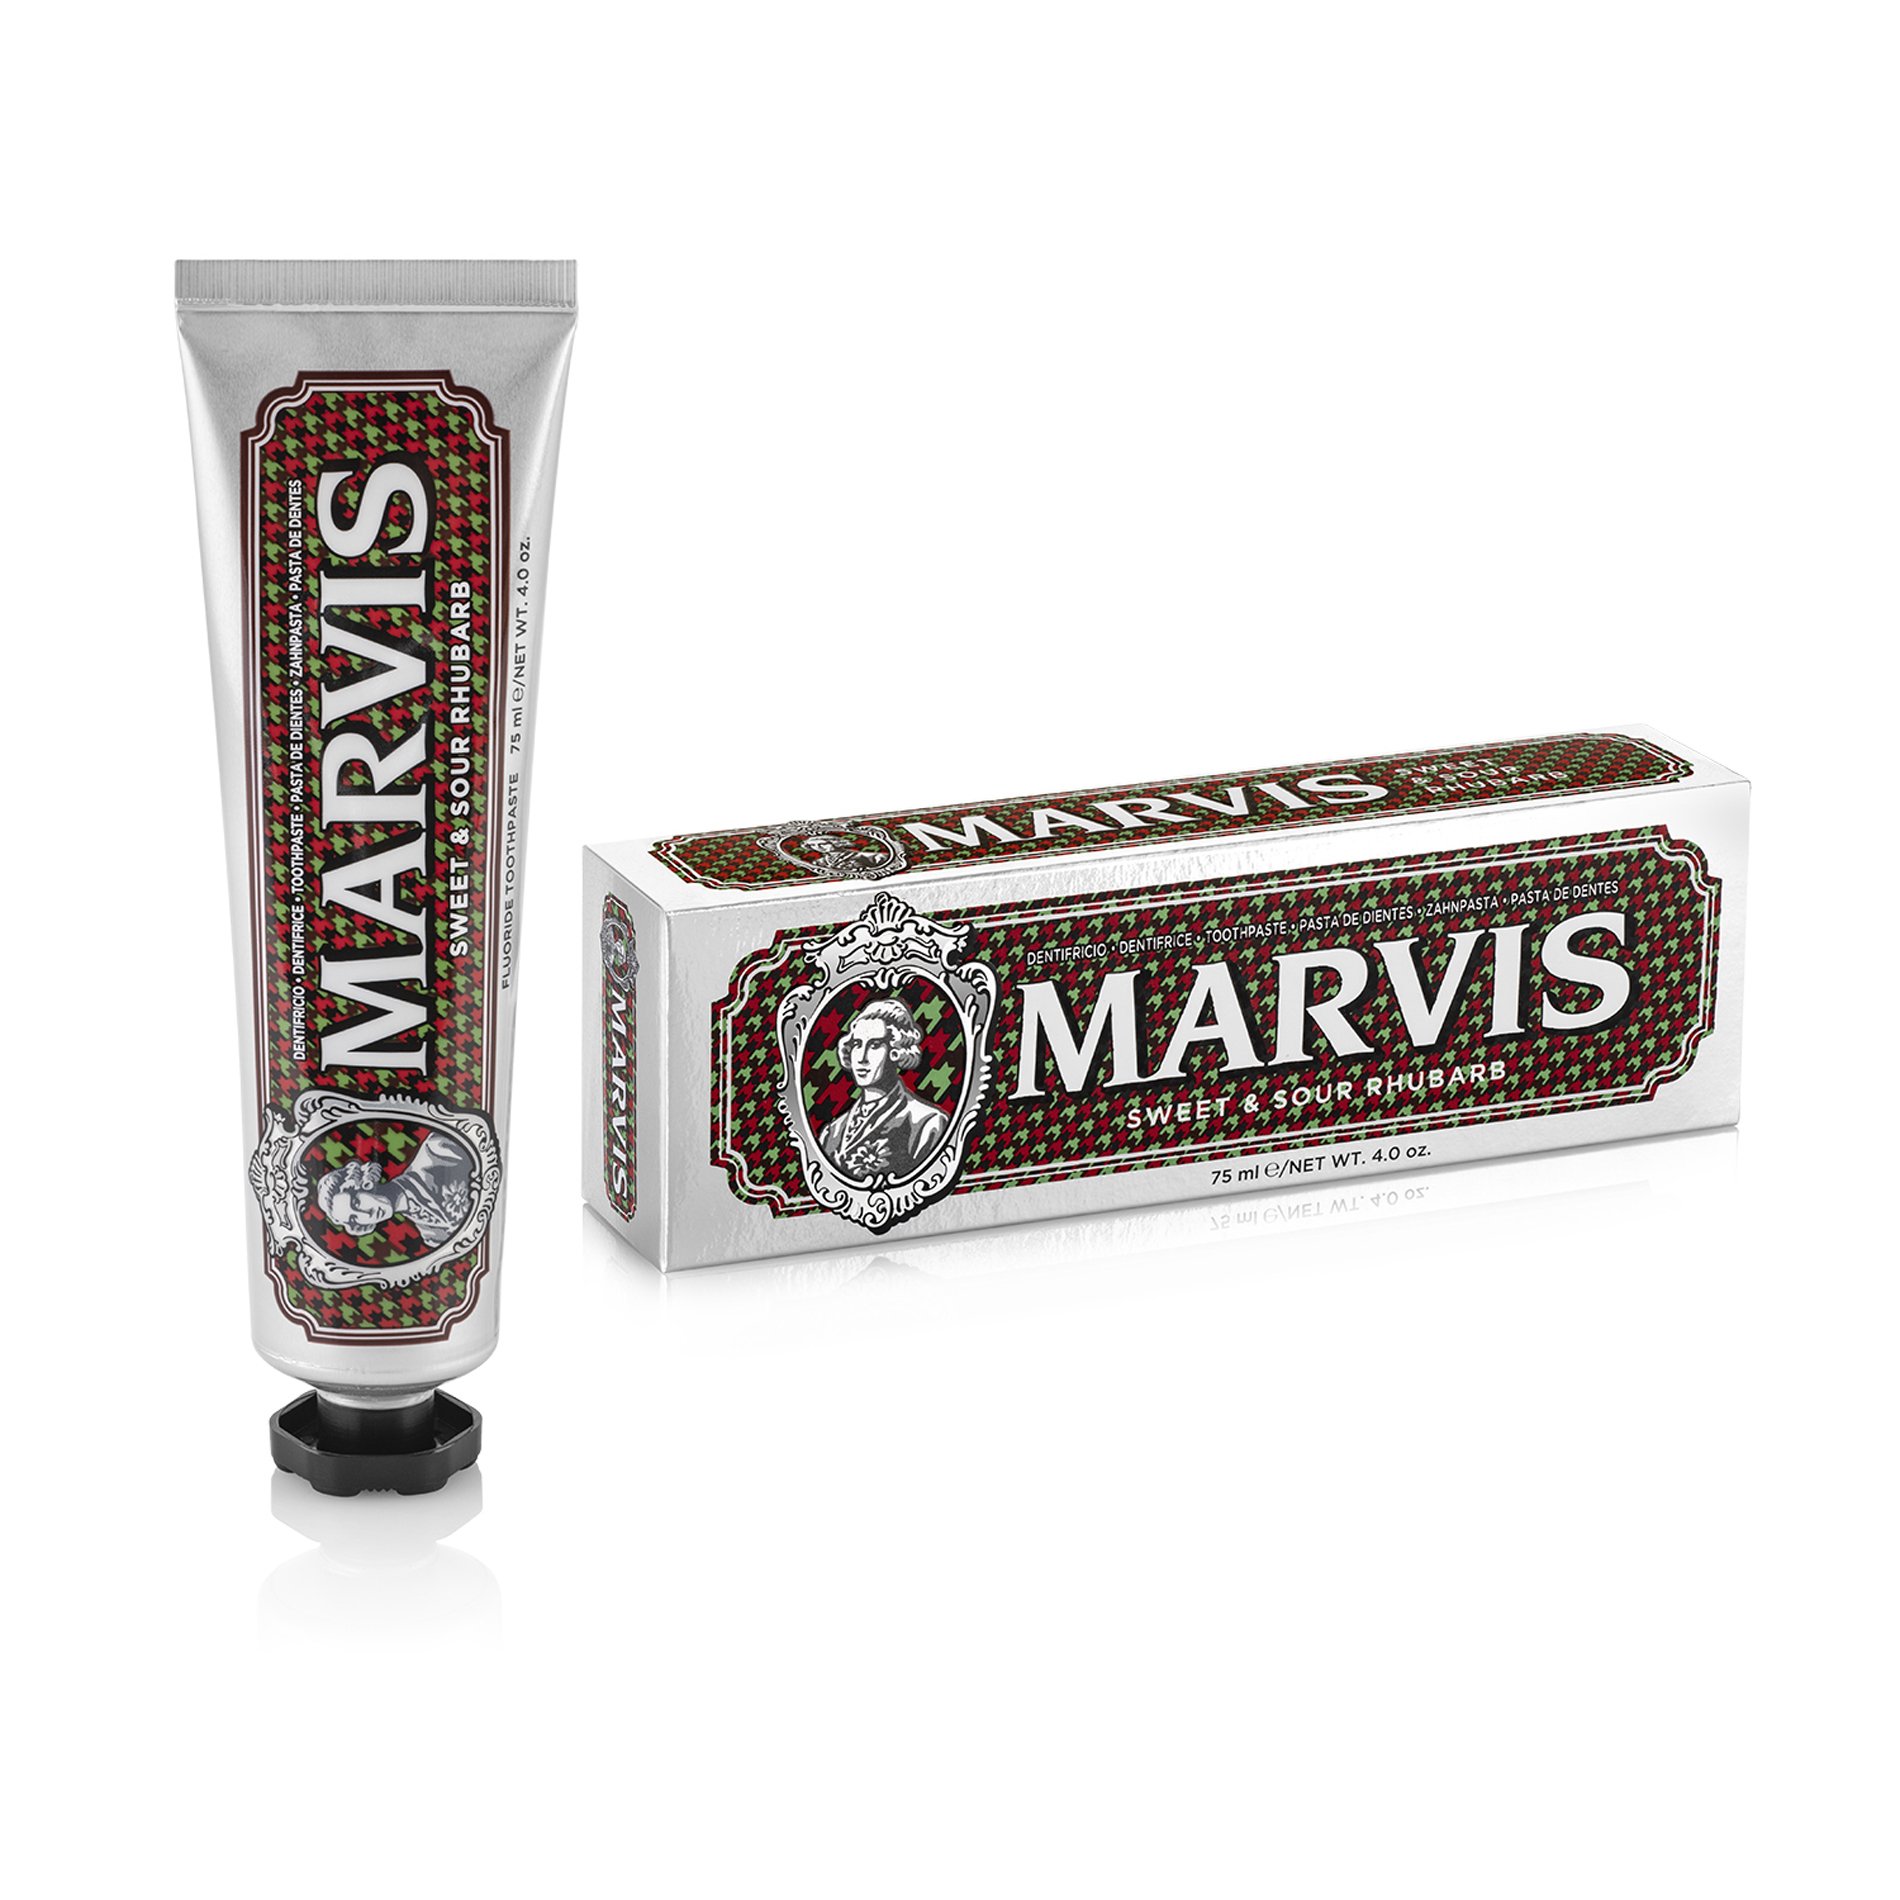 marvis-sweet-and-sour-rhubarb-toothpaste